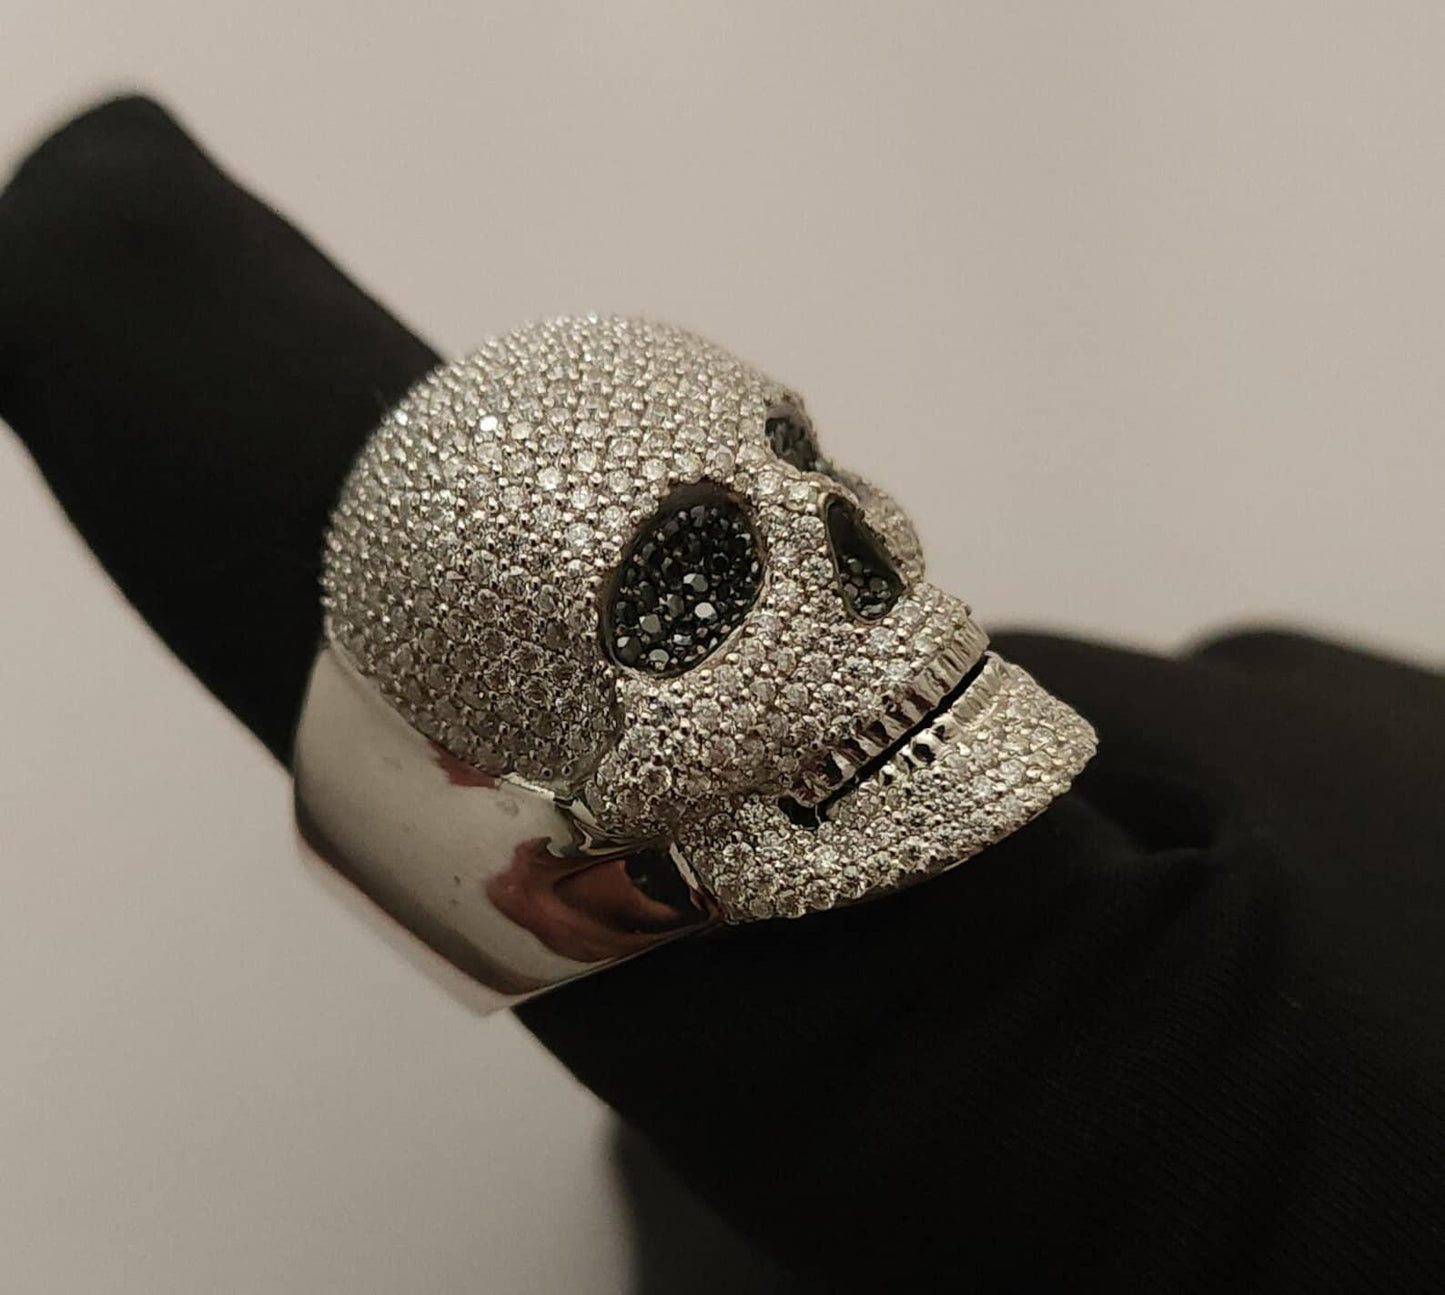 JBR JEWELER Iced Out Ring Skull  VVS Moissanite Iced Out Rapper Pinky Hip Hop Ring Men's S925 Silver Ring